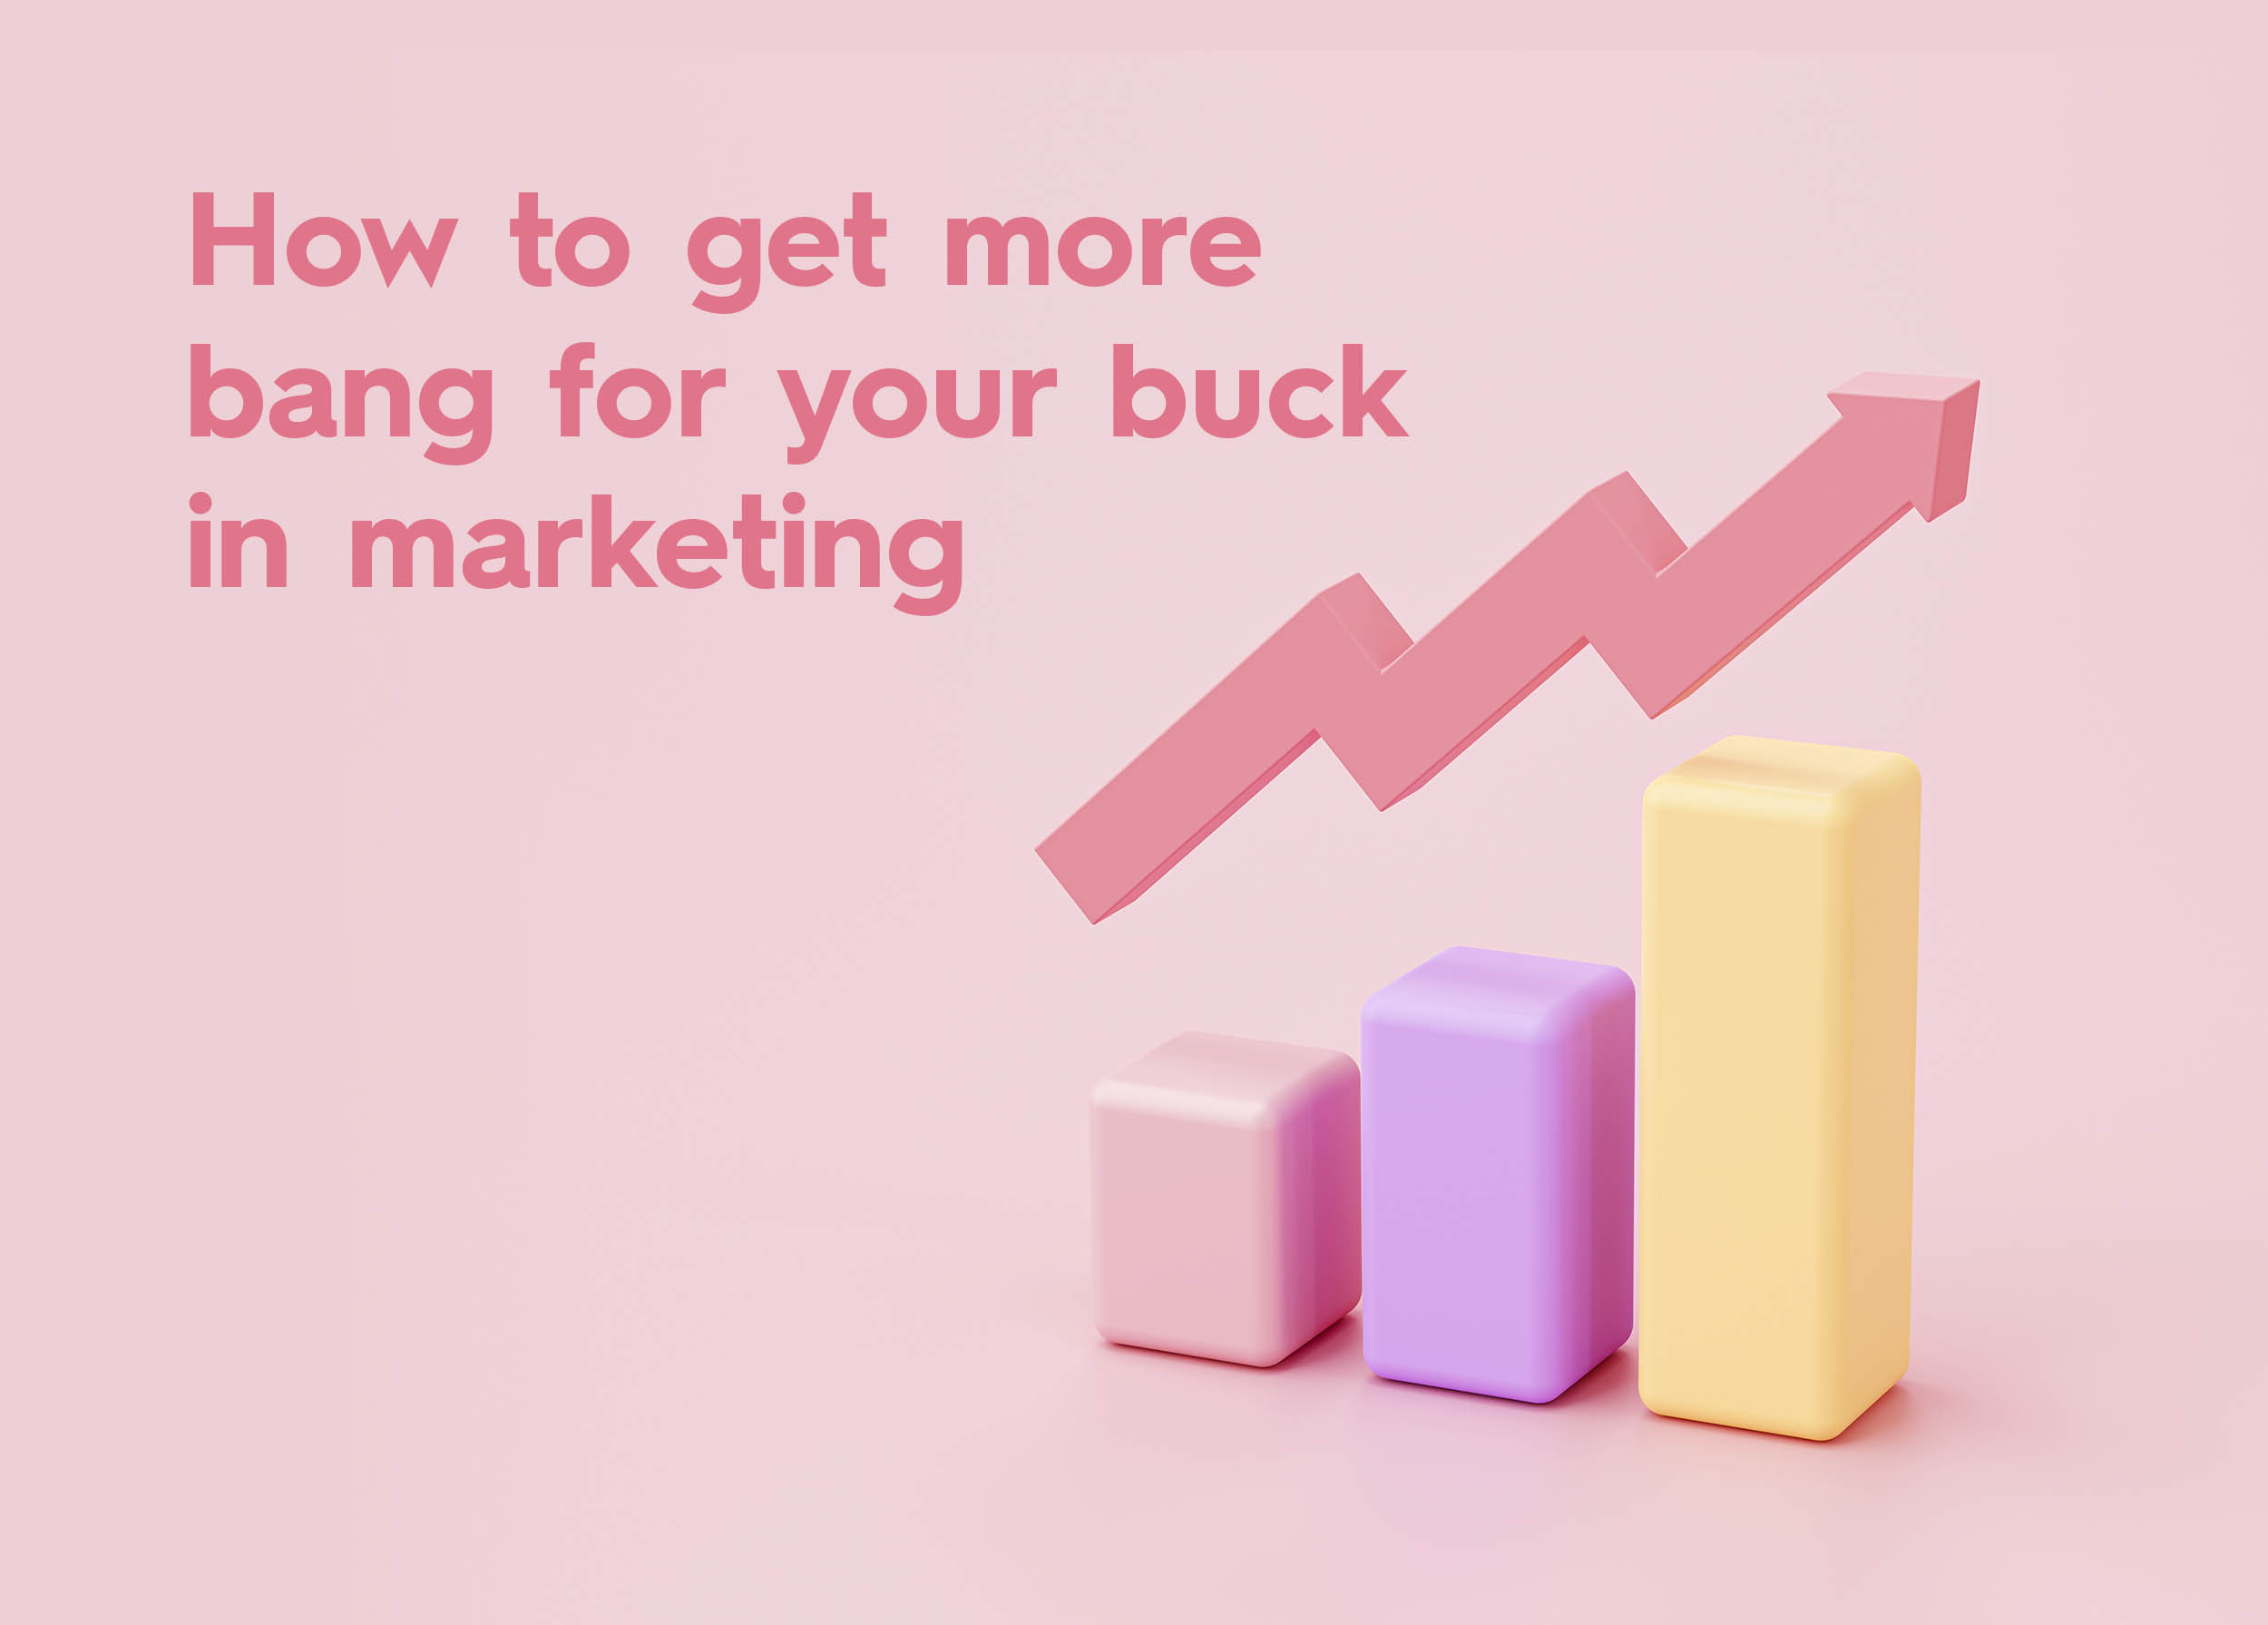 4 ways to get more bang for your buck in marketing